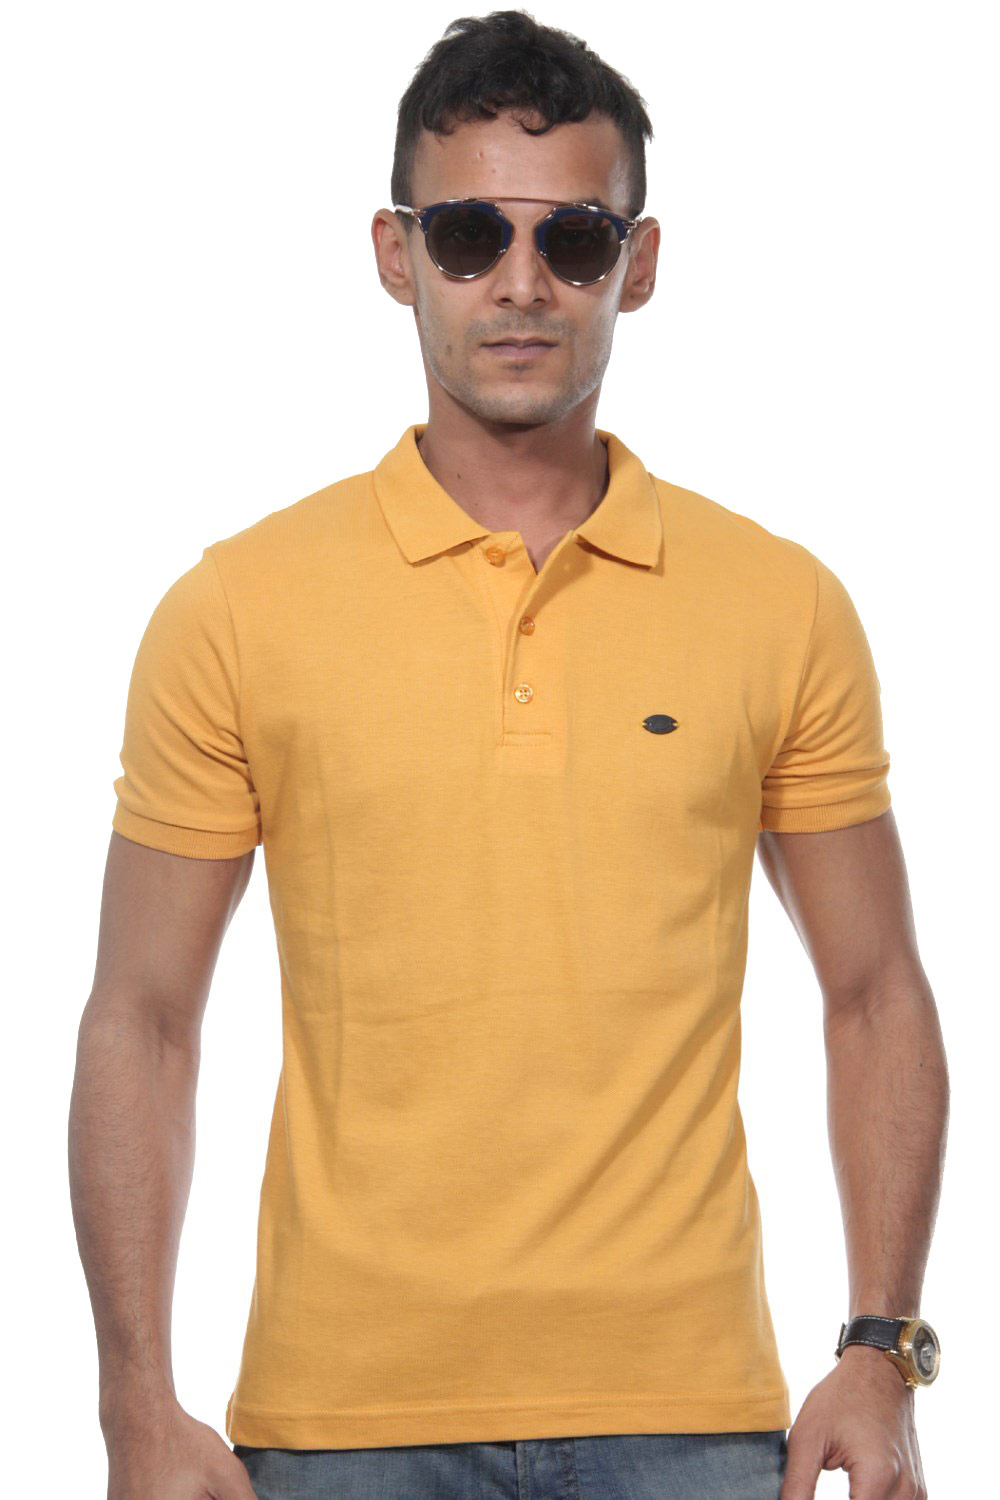 FIOCEO Polo shirt at oboy.com